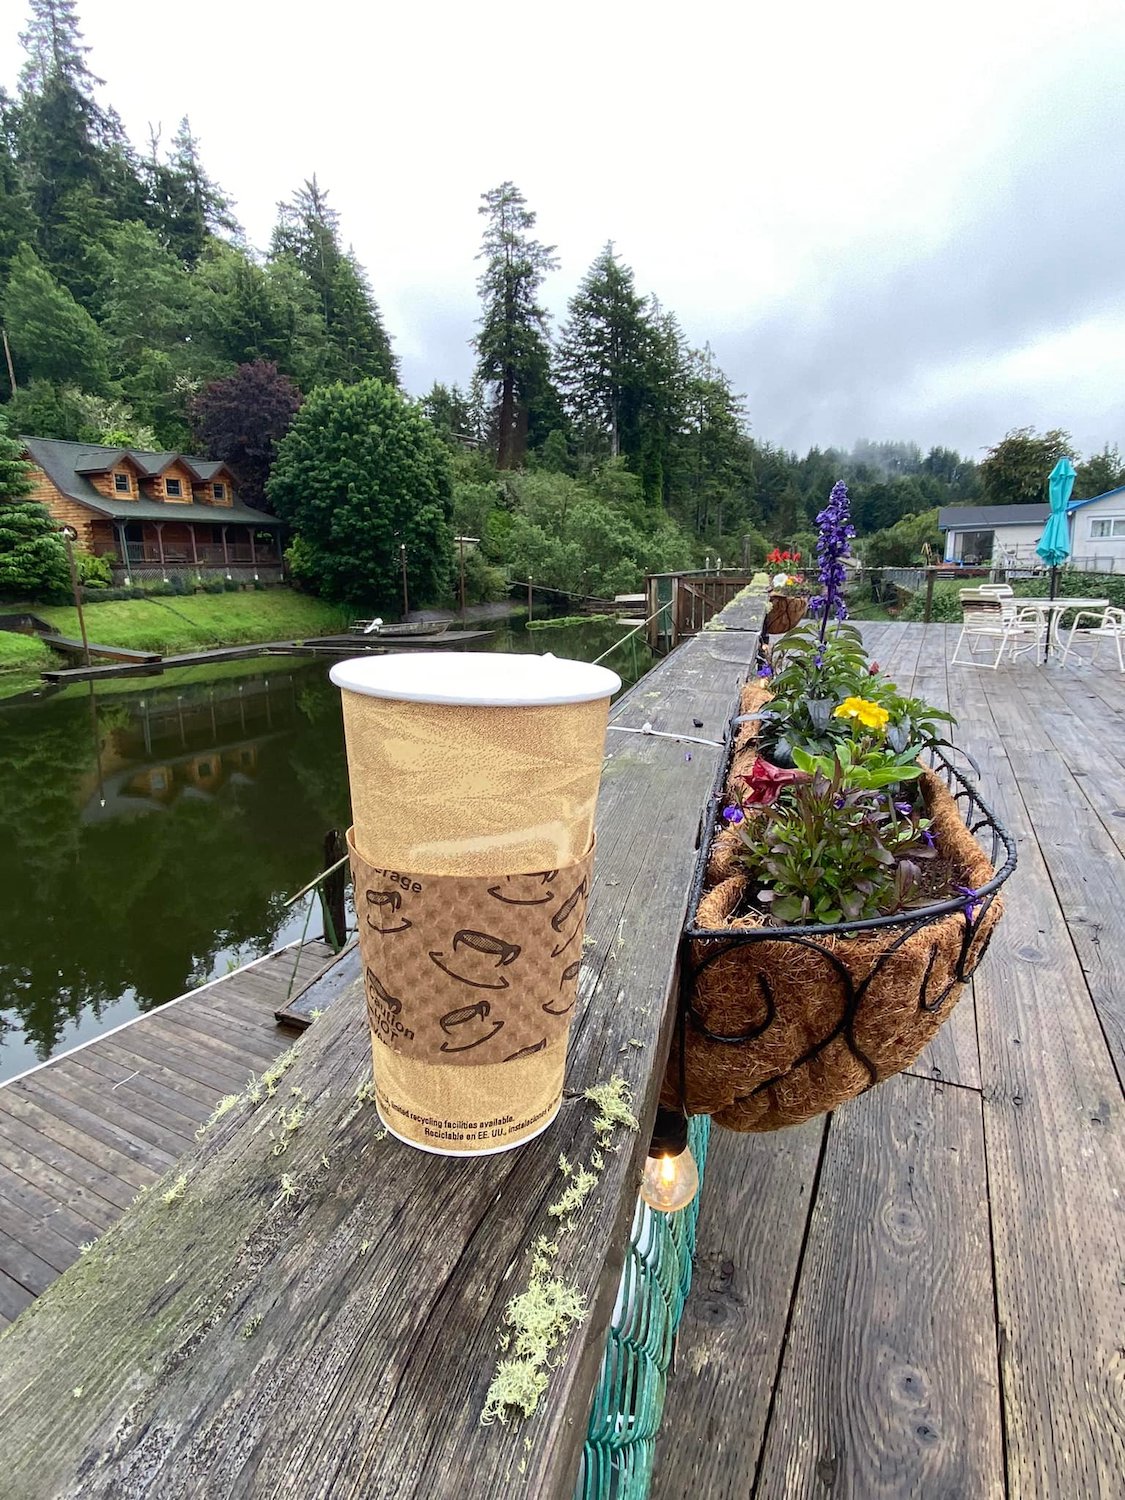 View of Tenmile Creek at Coasters Coffee in Lakeside, Oregon